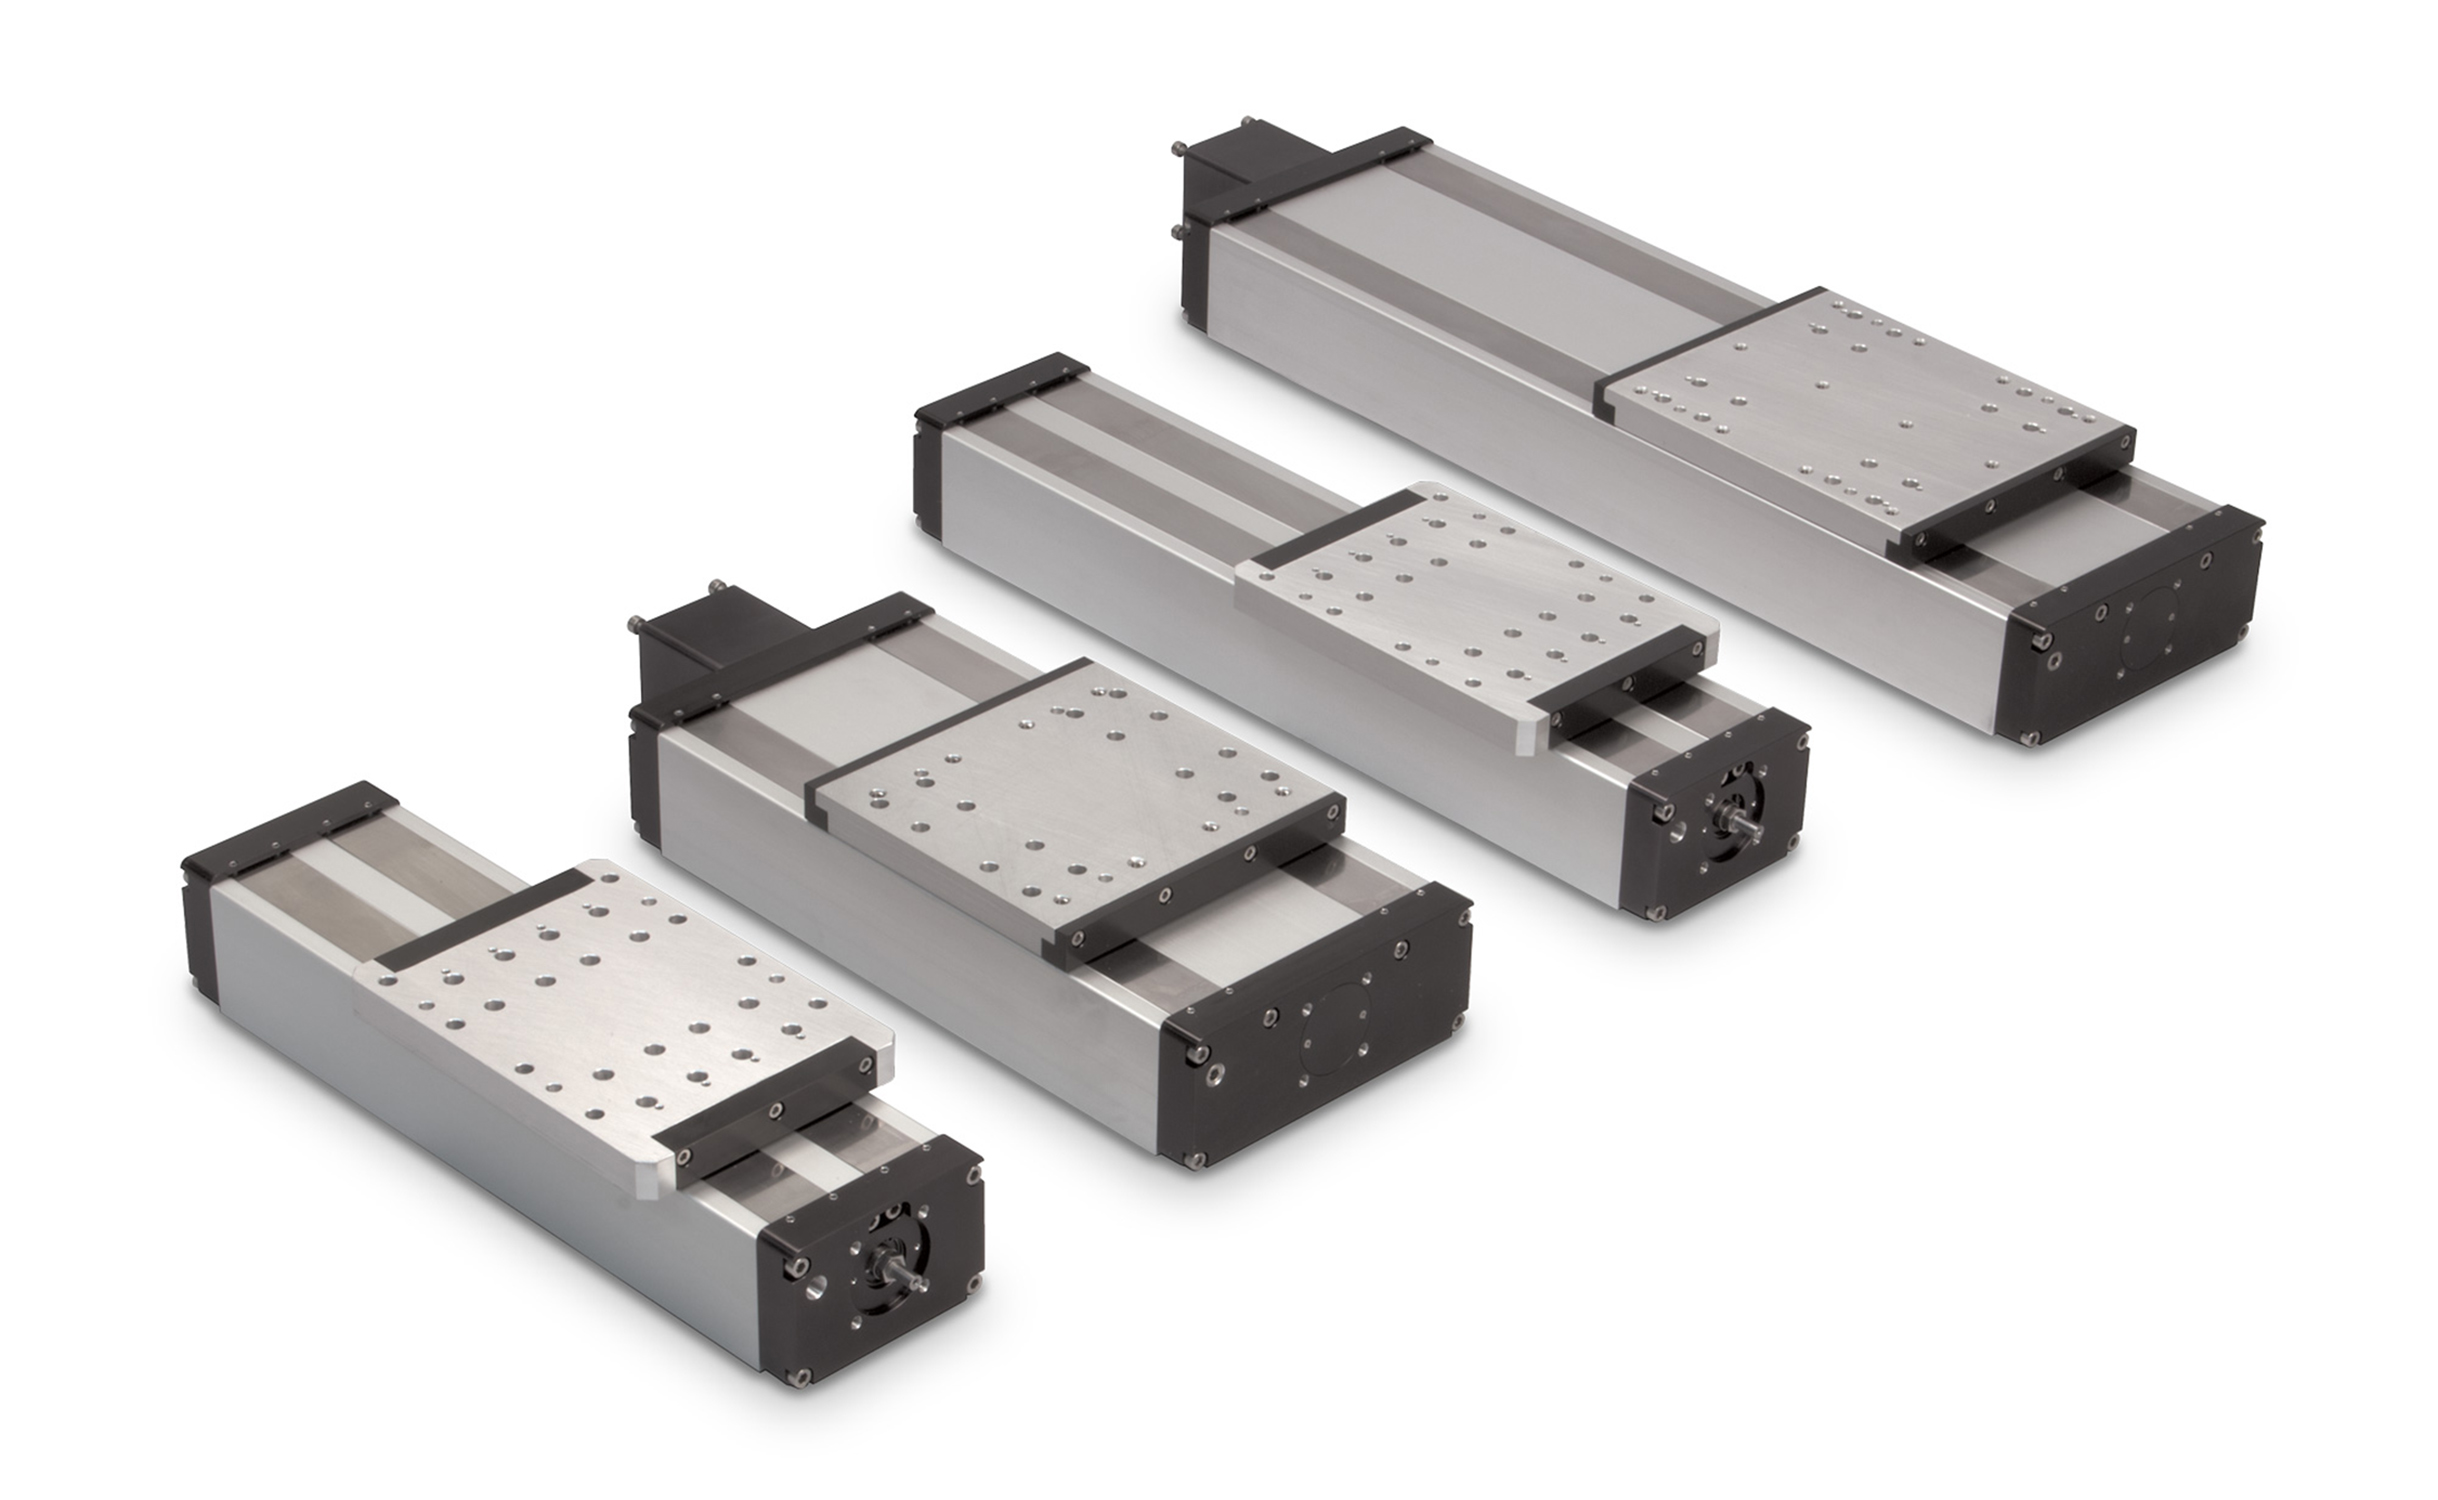 Multiaxis linear actuator system provides accurate control and saves OEMs time in installation